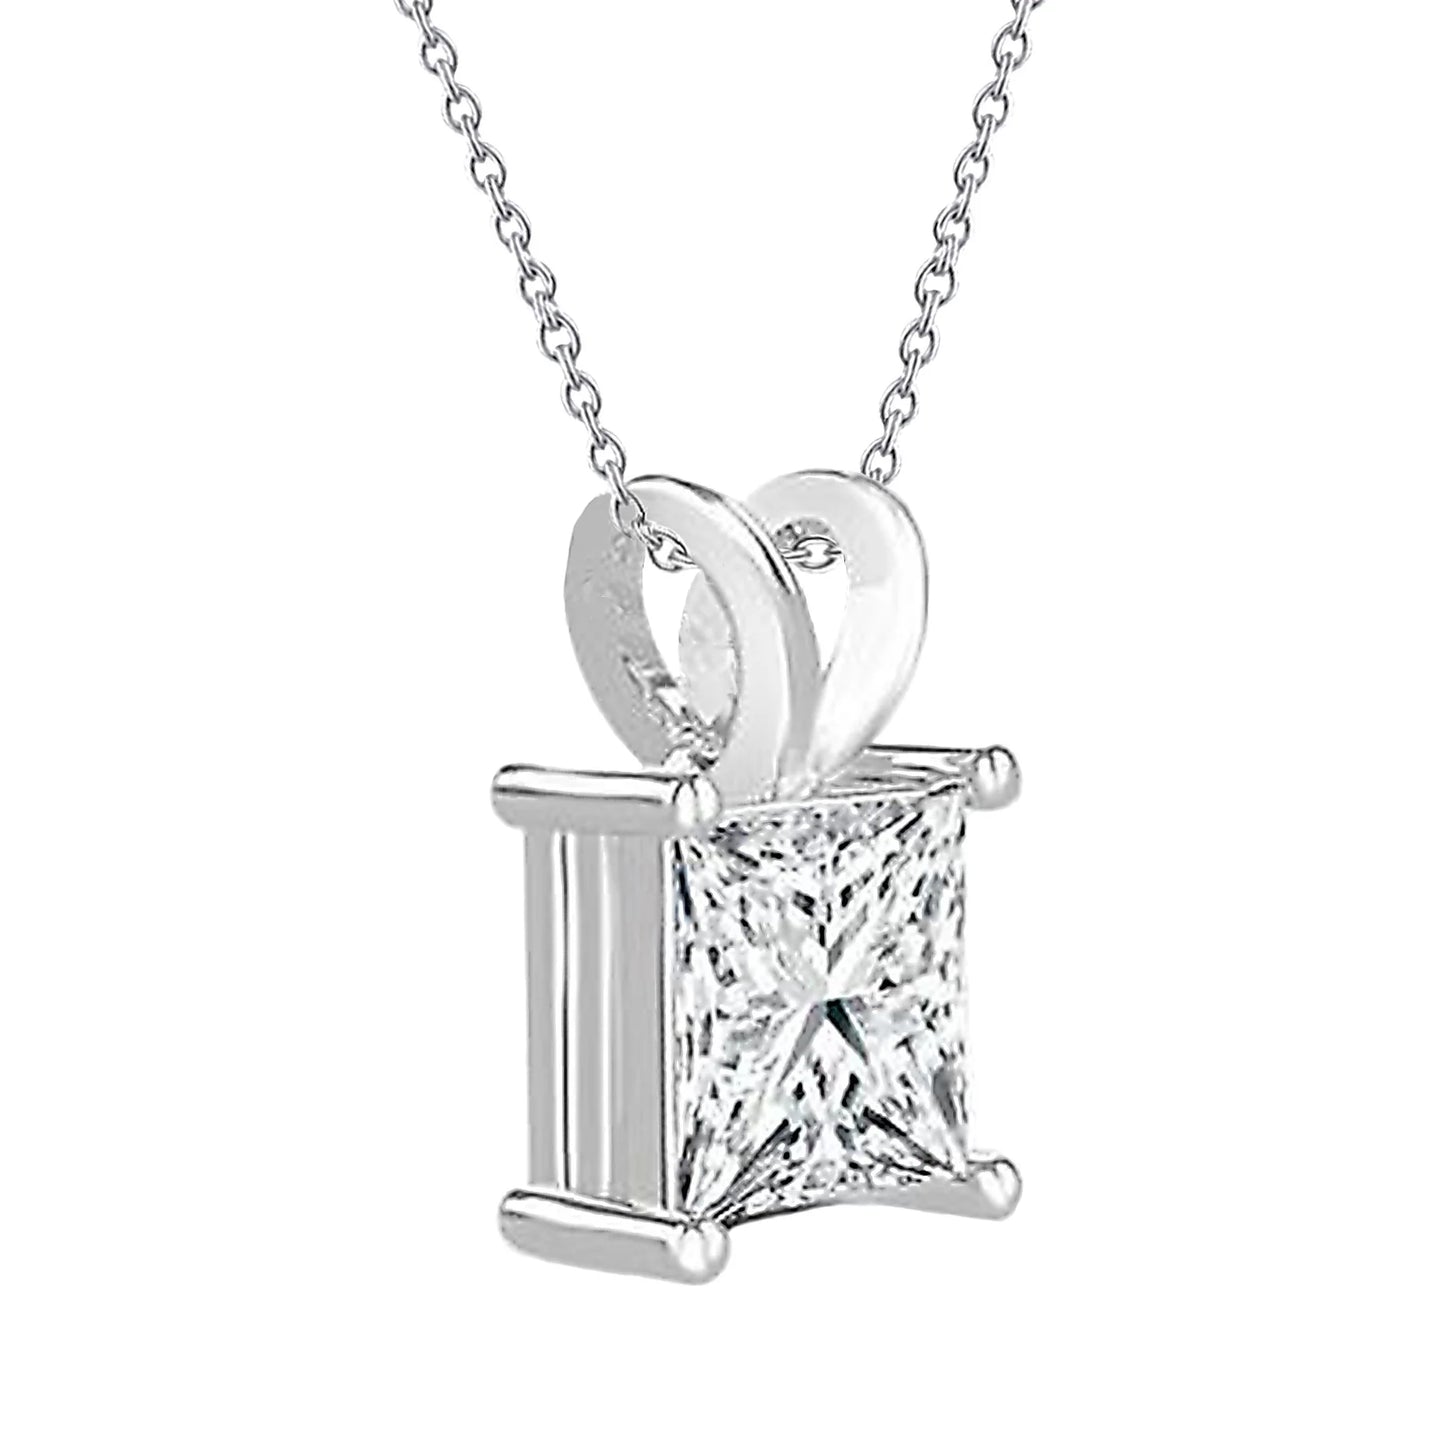 2.75 Carat Solitaire Real Diamond Pendant Necklace With Chain White Gold